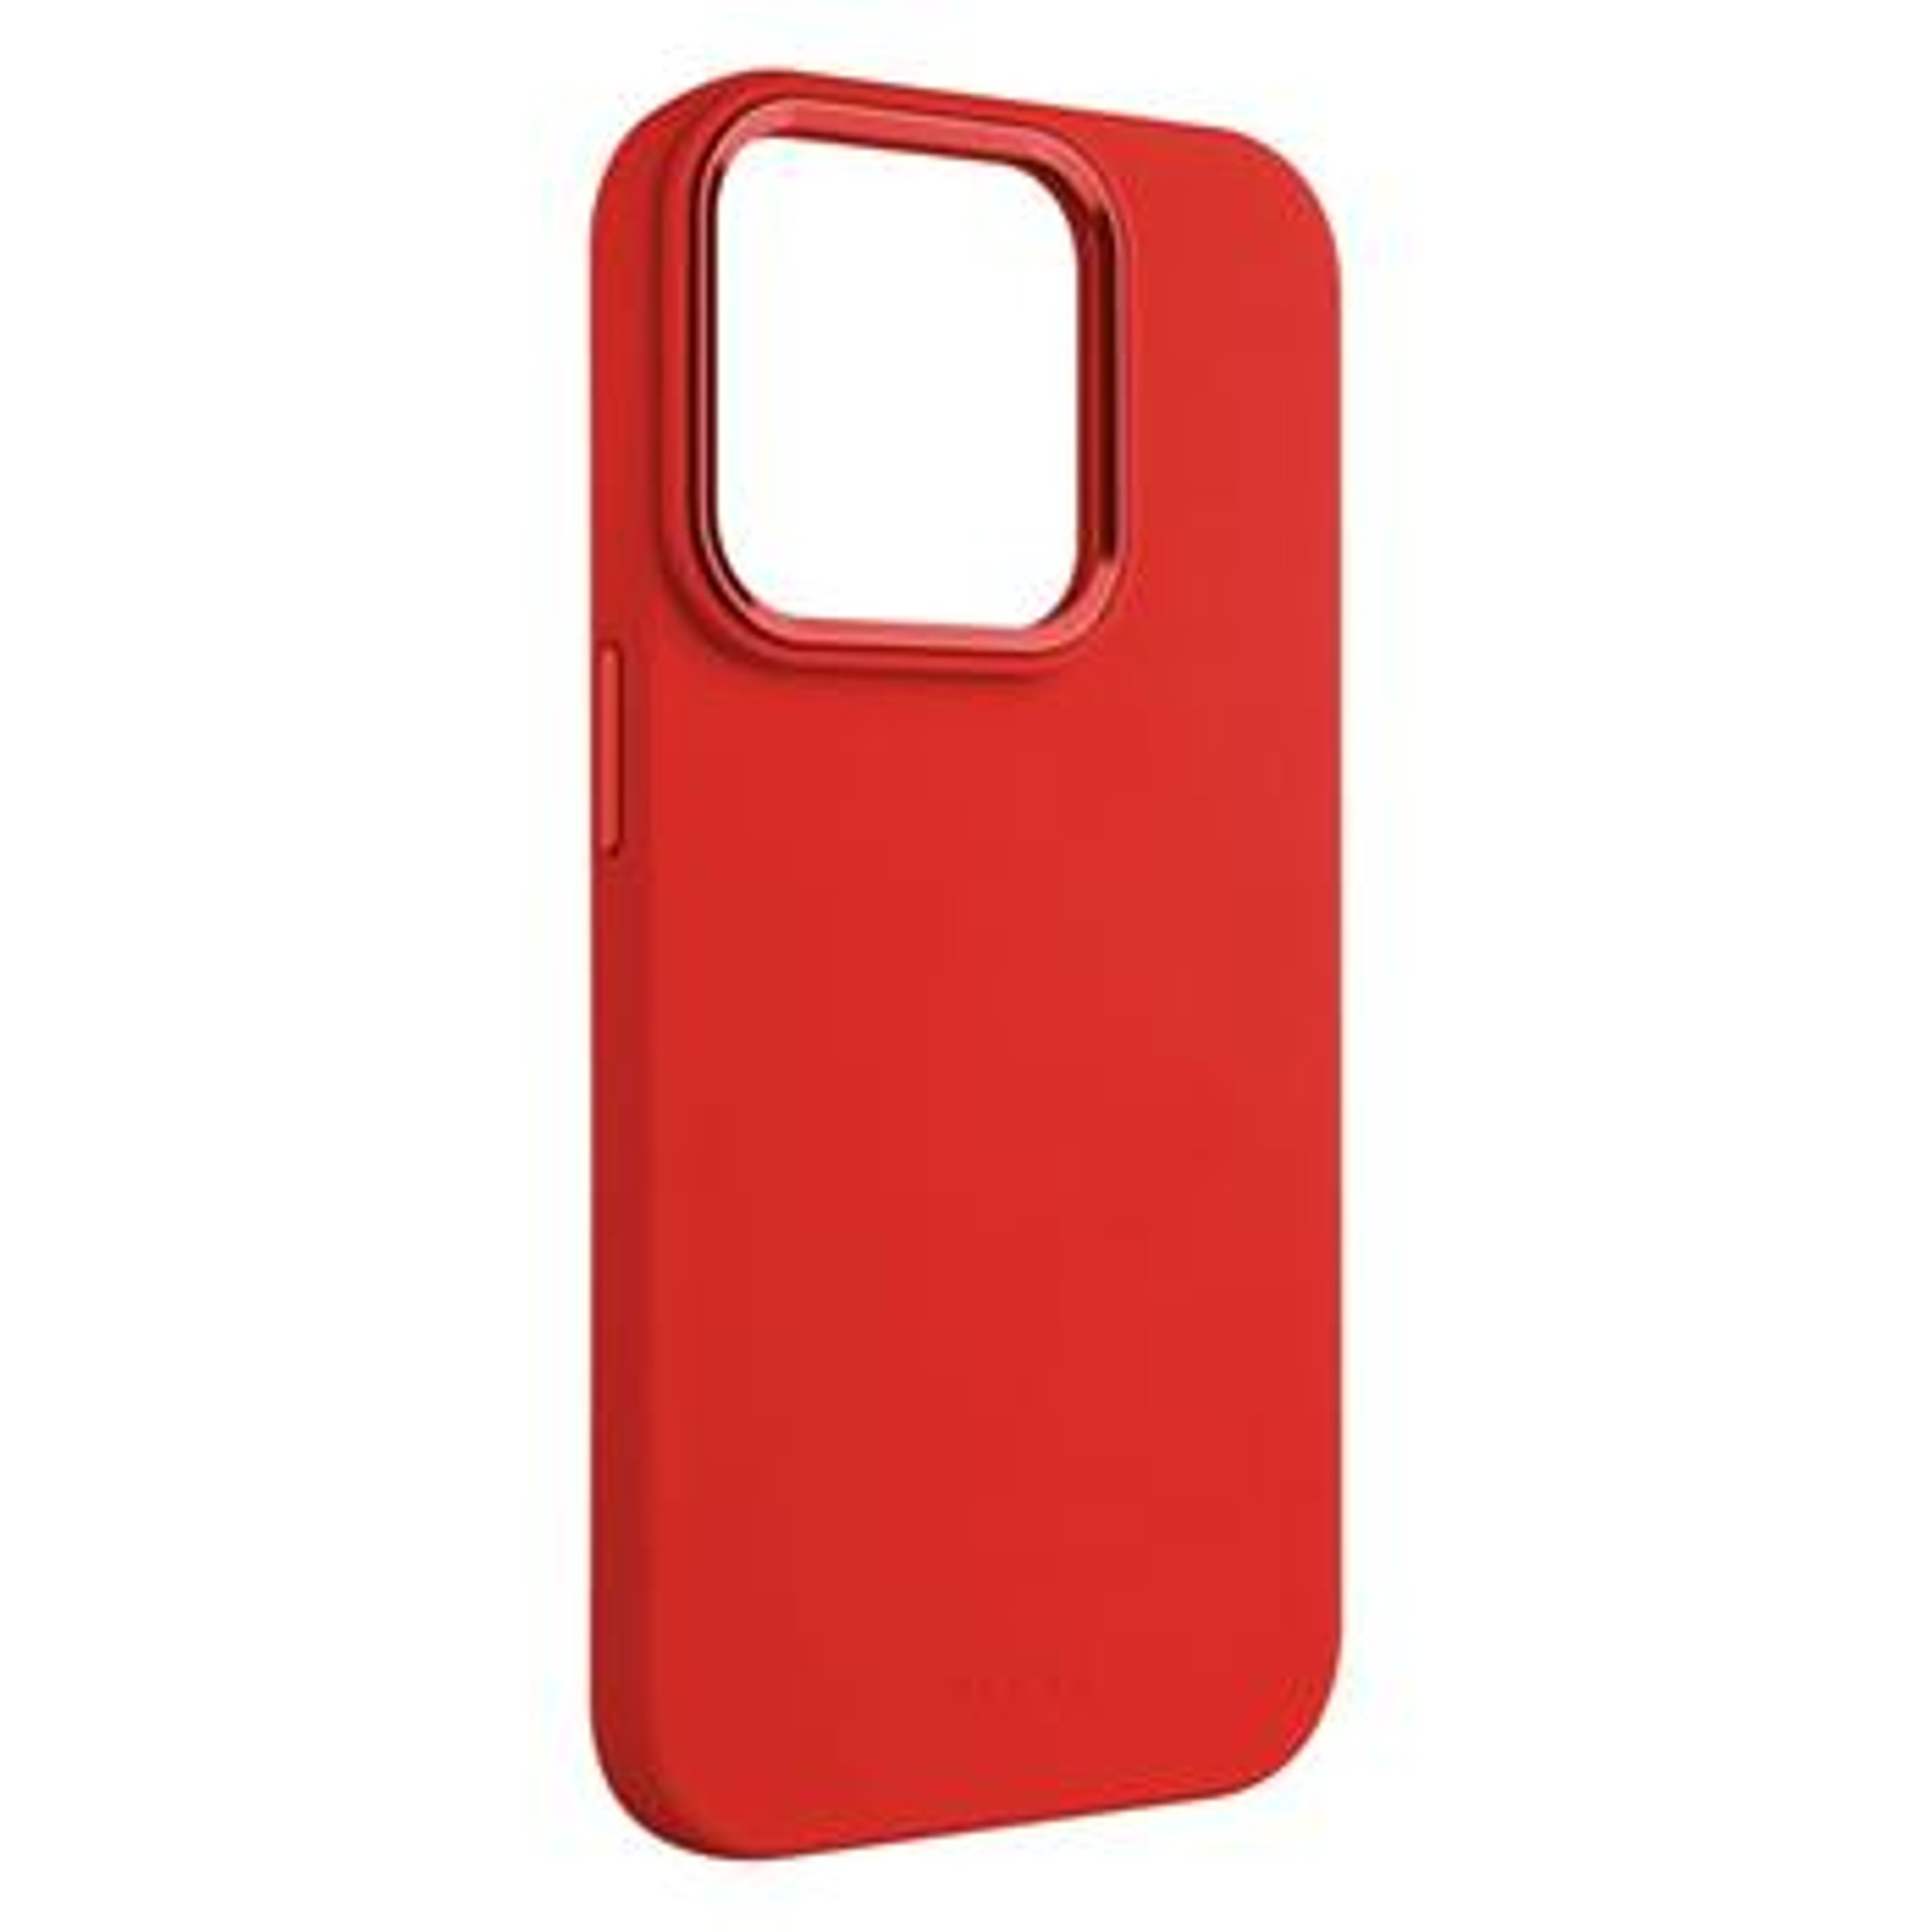 Backcover, Max, iPhone MagFlow FIXED Pro Rot 15 FIXFLM2-1203-RD, Apple,